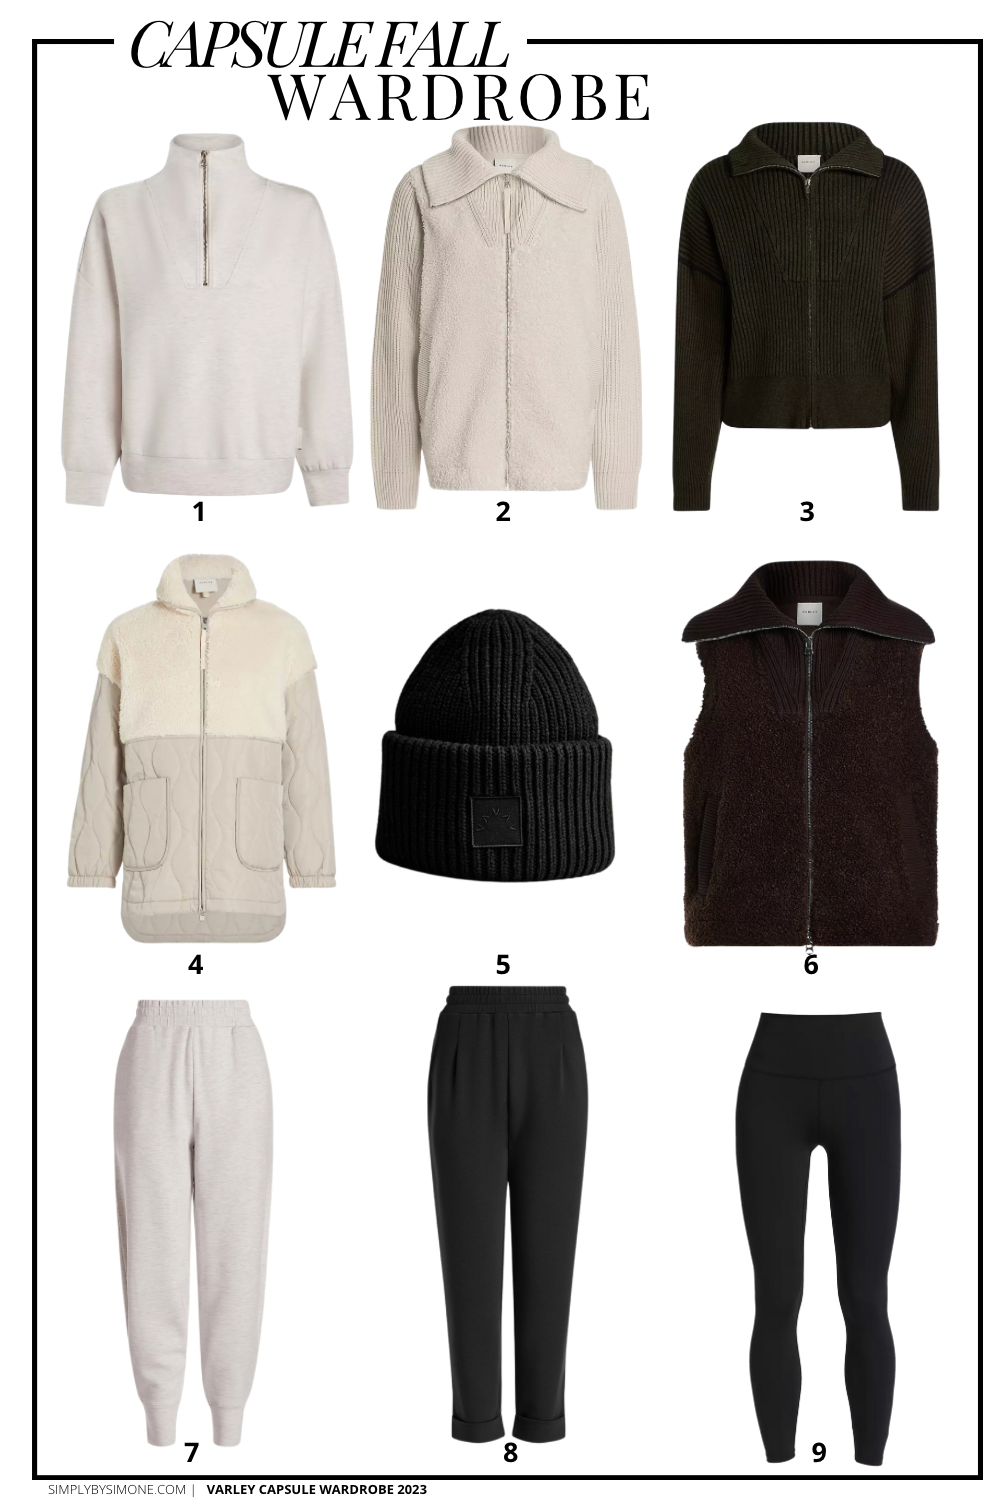 Varley Fall Capsule Wardrobe | Casual Fall Capsule Wardrobe | How to Build a Capsule Wardrobe | Varley Fall Clothes | Outfit Inspiration | 48 Fall Weather Outfit Ideas | Fall Vacation Packing Guide | Varley Fall Capsule Wardrobe - What To Wear This Fall 2023 | Casual Outfit Ideas | Athleisure Wear Capsule Wardrobe | Simply by Simone | Items 1-9